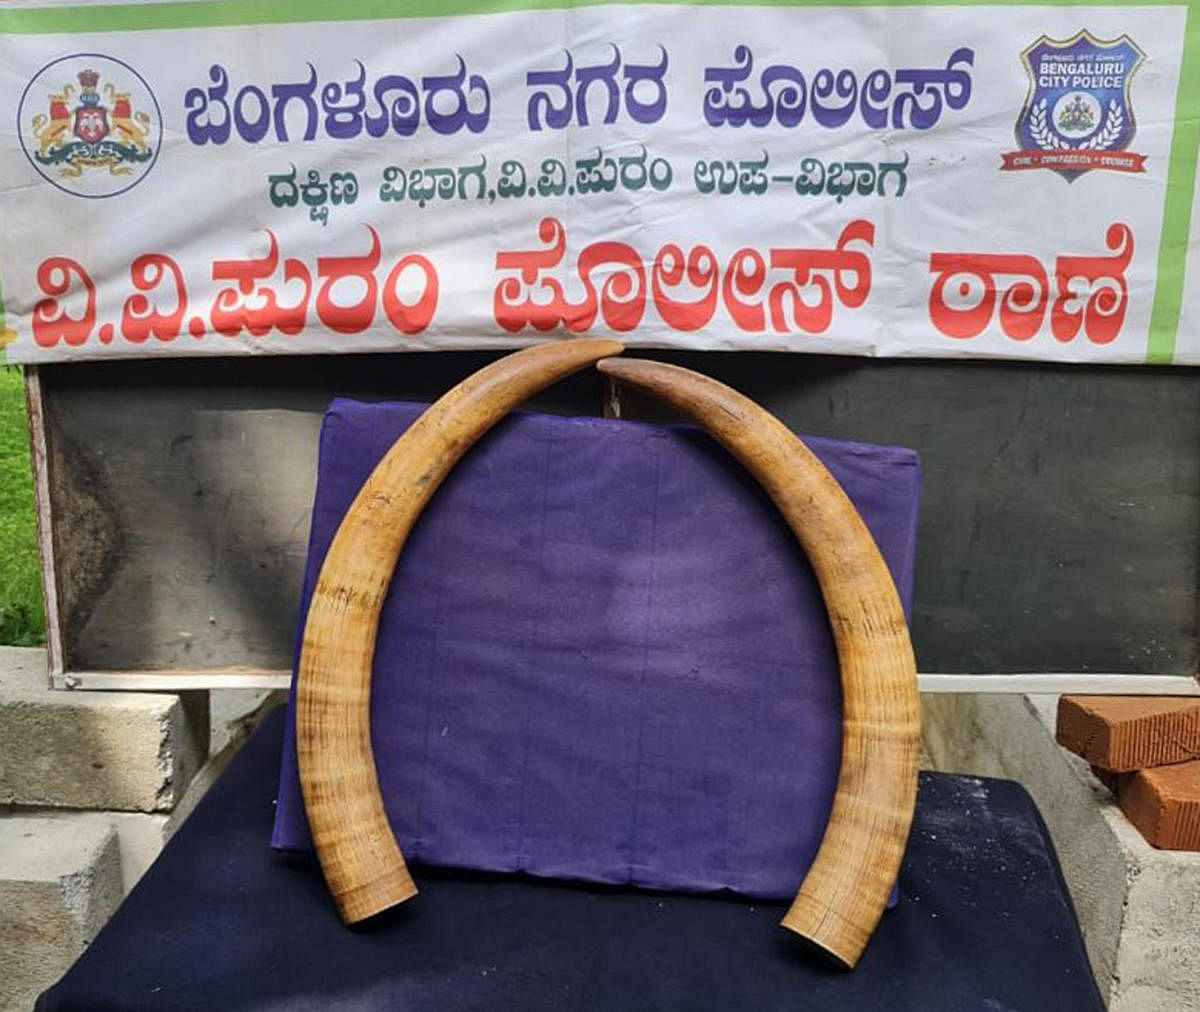 Five men trying to sell elephant tusks caught on Food Street